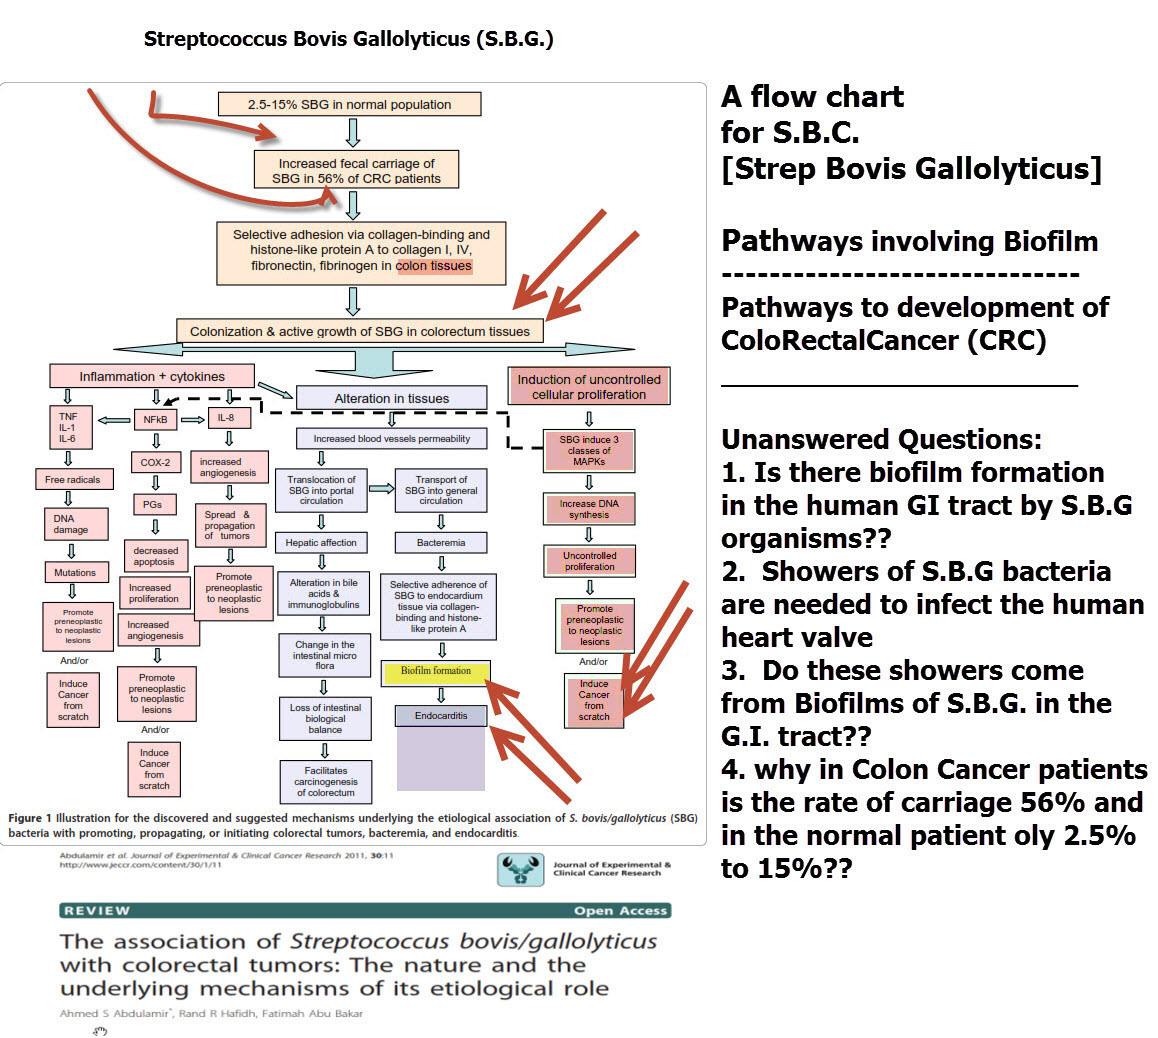 diagram-flow-chart-strep-bovis-gallolyticus-and-human-disease-annotated-and-referenced